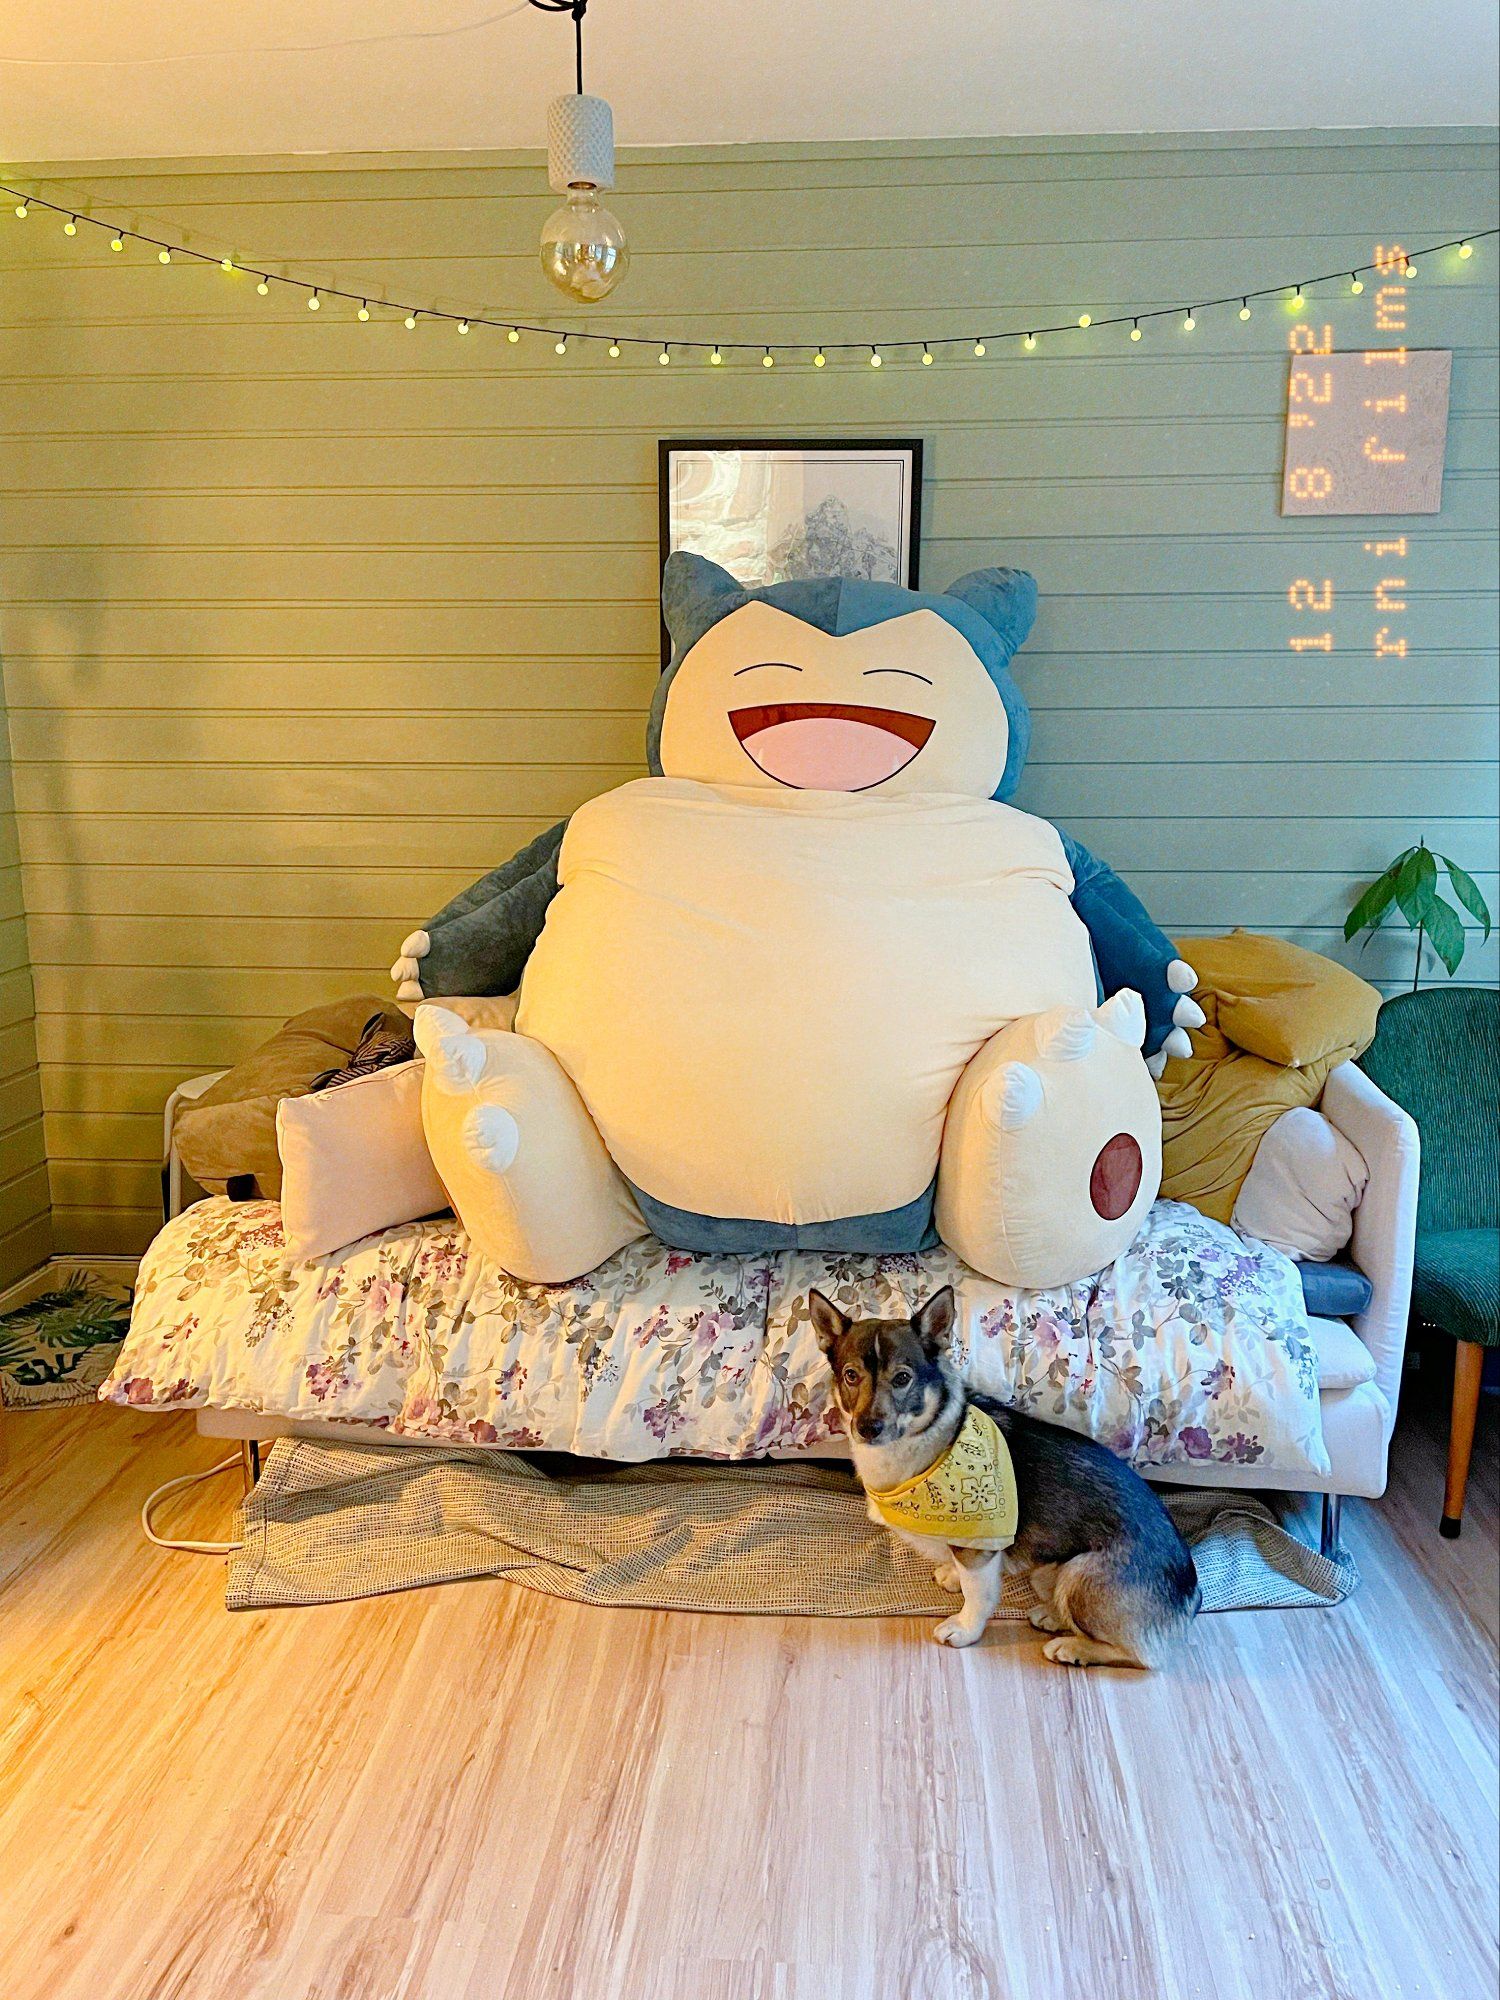 A photo with a dog in a yellow neckerchief sitting on the floor, and a huge Snorlax plush toy Pokèmon sitting on the couch